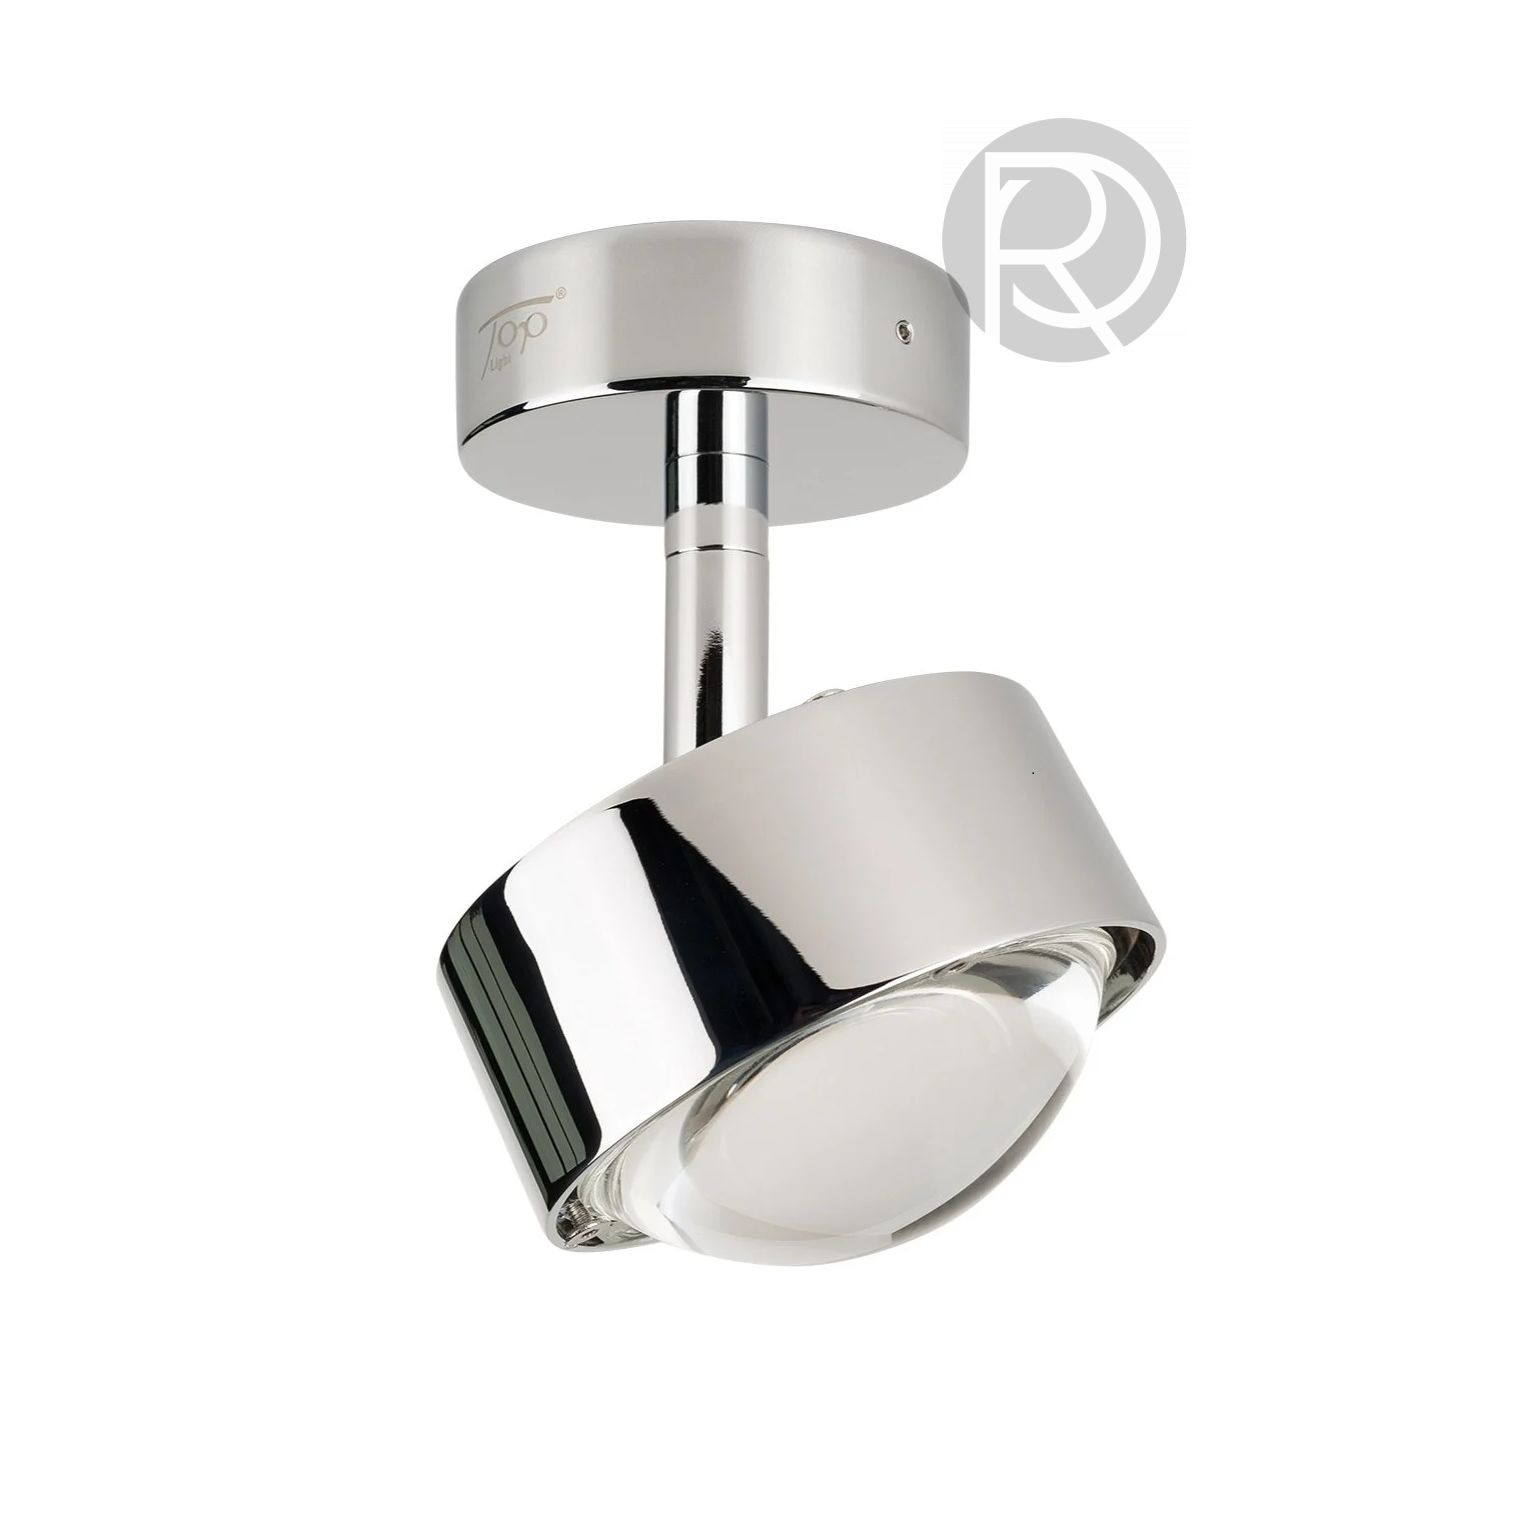 Ceiling lamp PUK TURN by TOP LIGHT